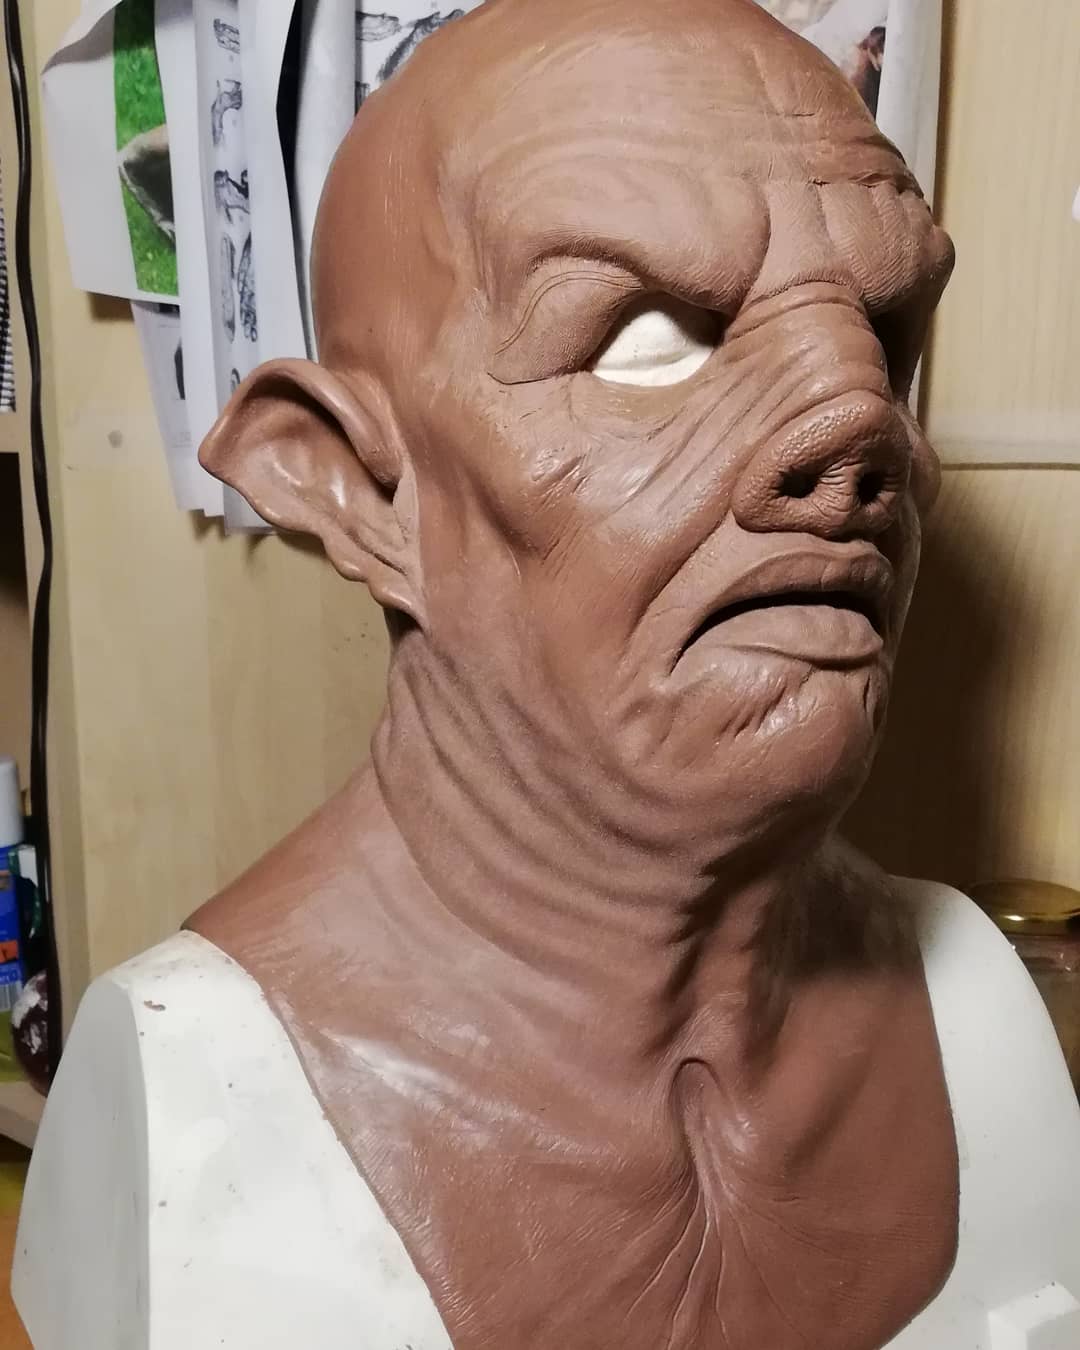 Monster Clay on X: Monster Clay Sculpt of the Day 01/01/19 📷 :  @Monsterpappa #art #characterdesign #clay #claysculpture #ilovemonsterclay  #mcsotd #monster #monsterart #monsterclay #monstermakers # oilbasedclay  #oilclay #sculpting #sculptoftheday